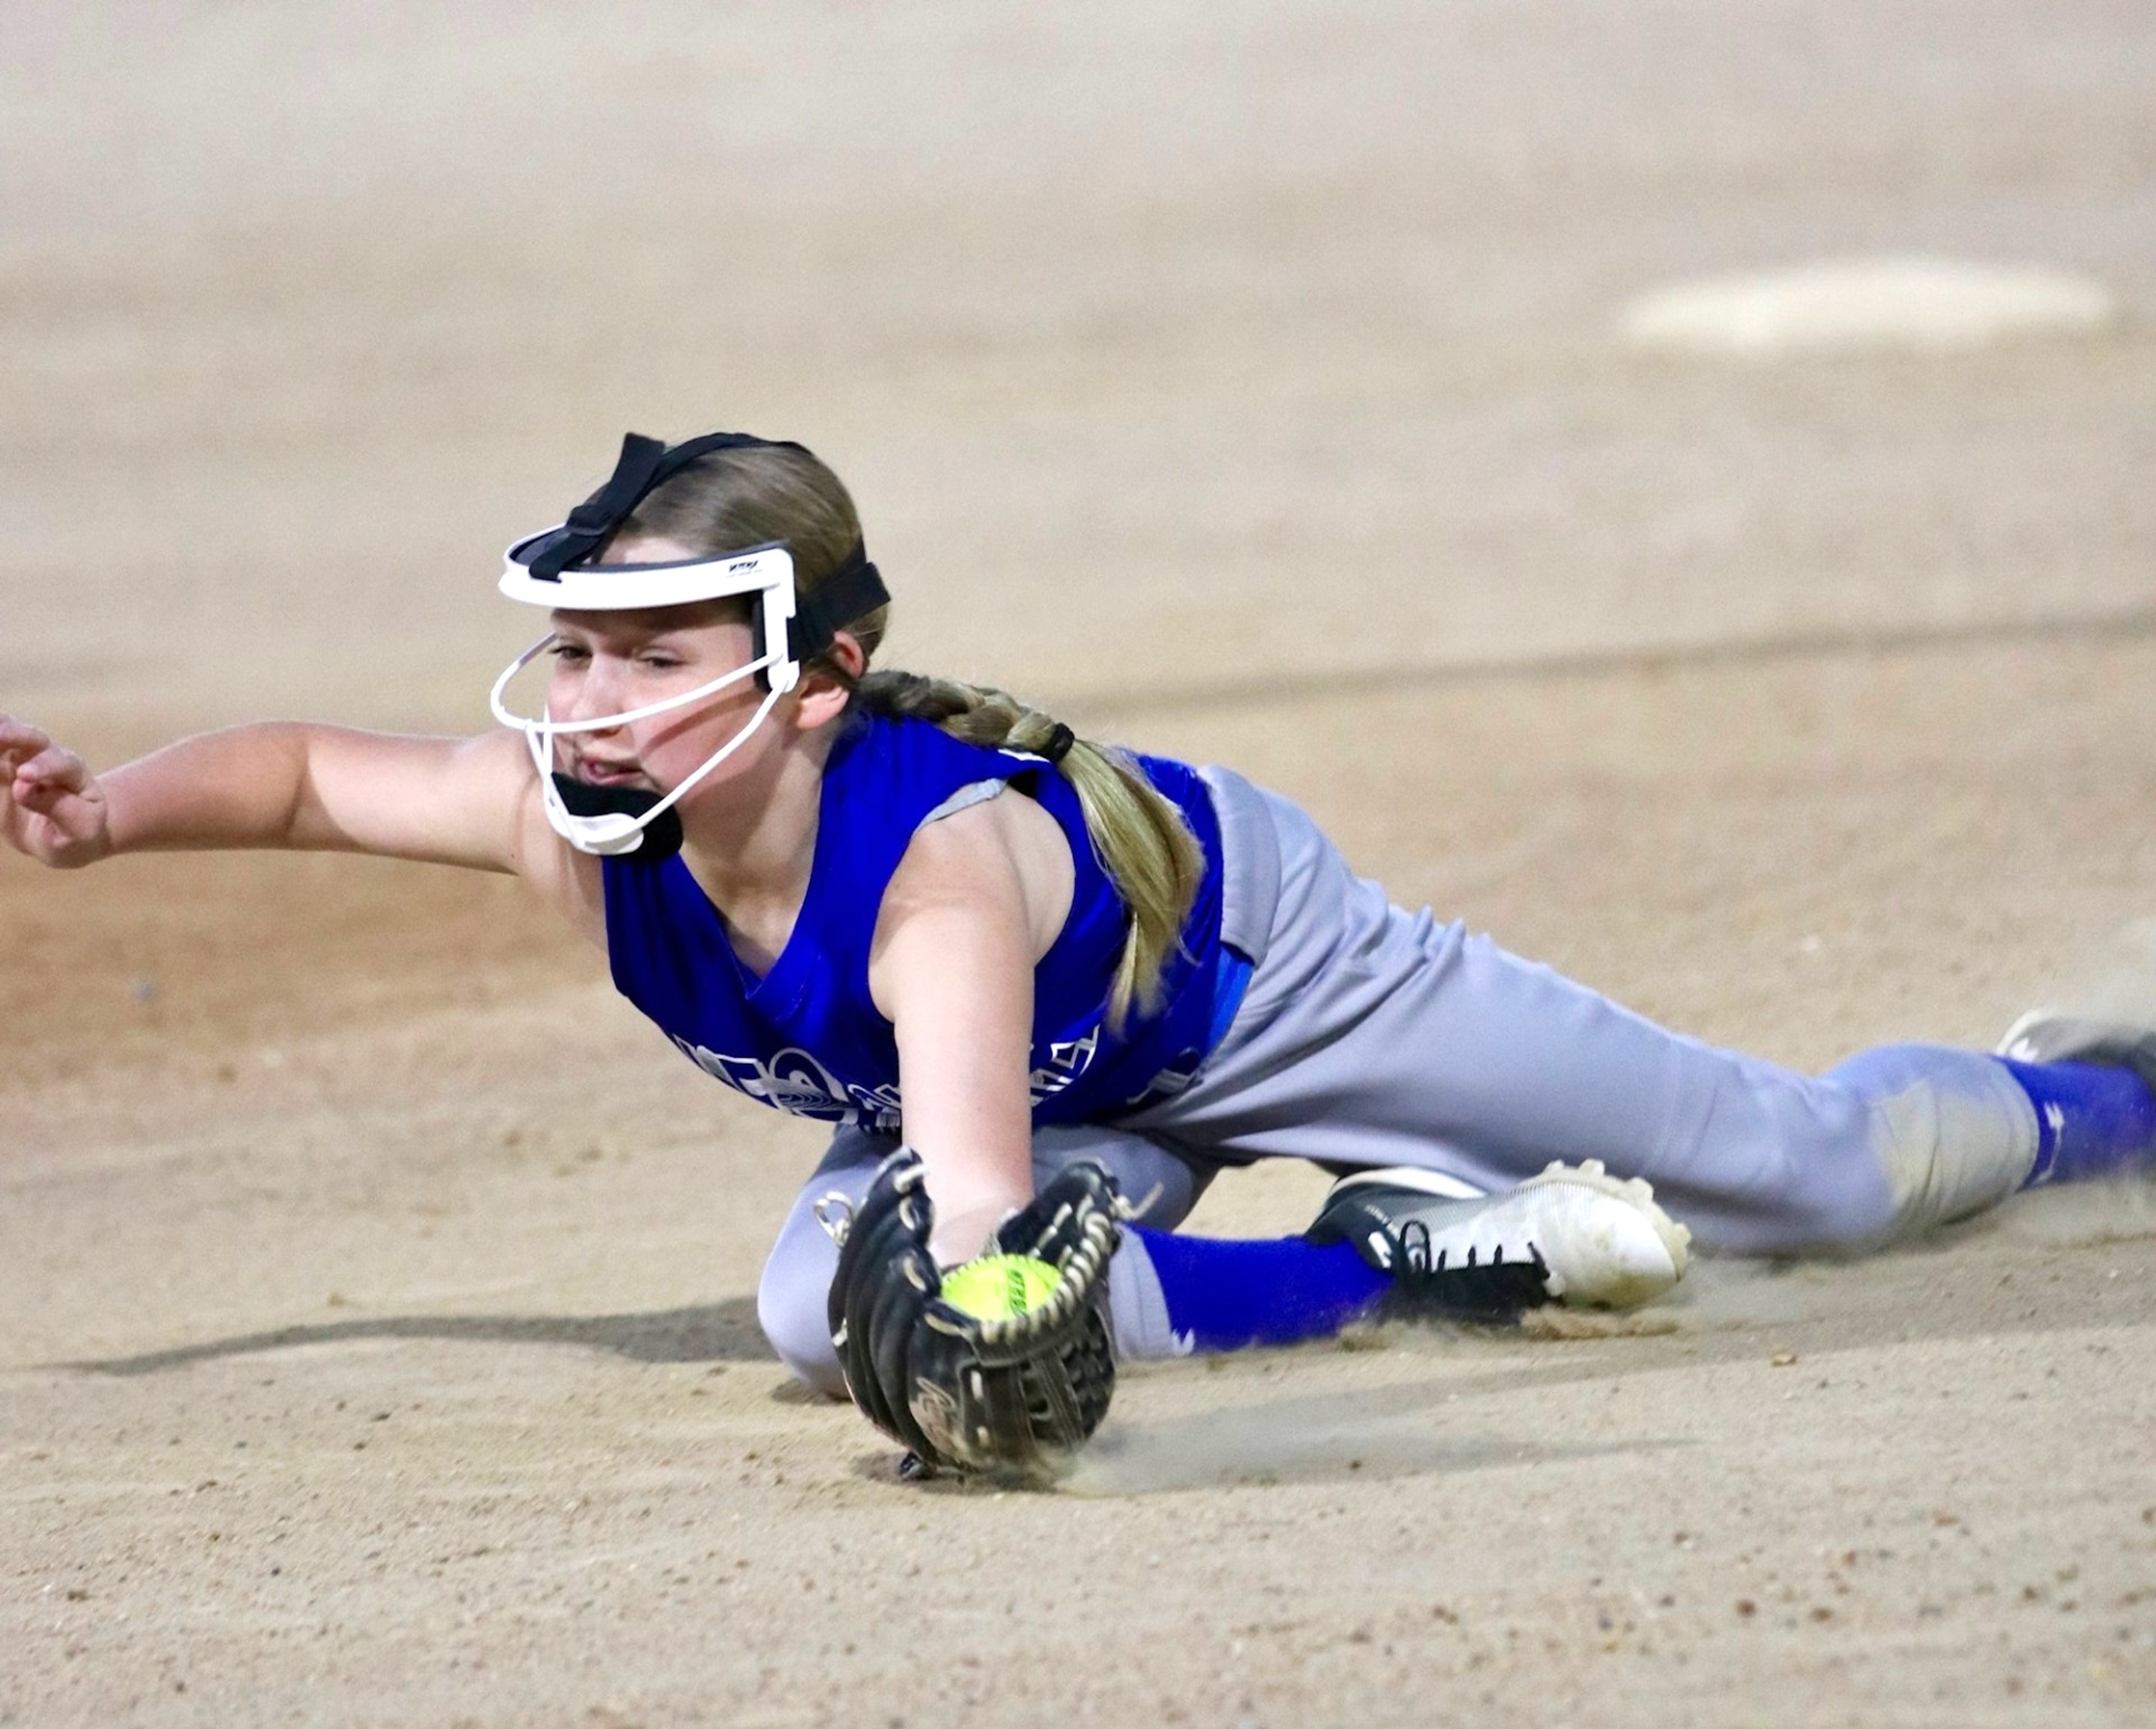 
Brooke Beussink completes a spectacular infield dive to catch a ball during the Friday night 12 Leopold softball game.